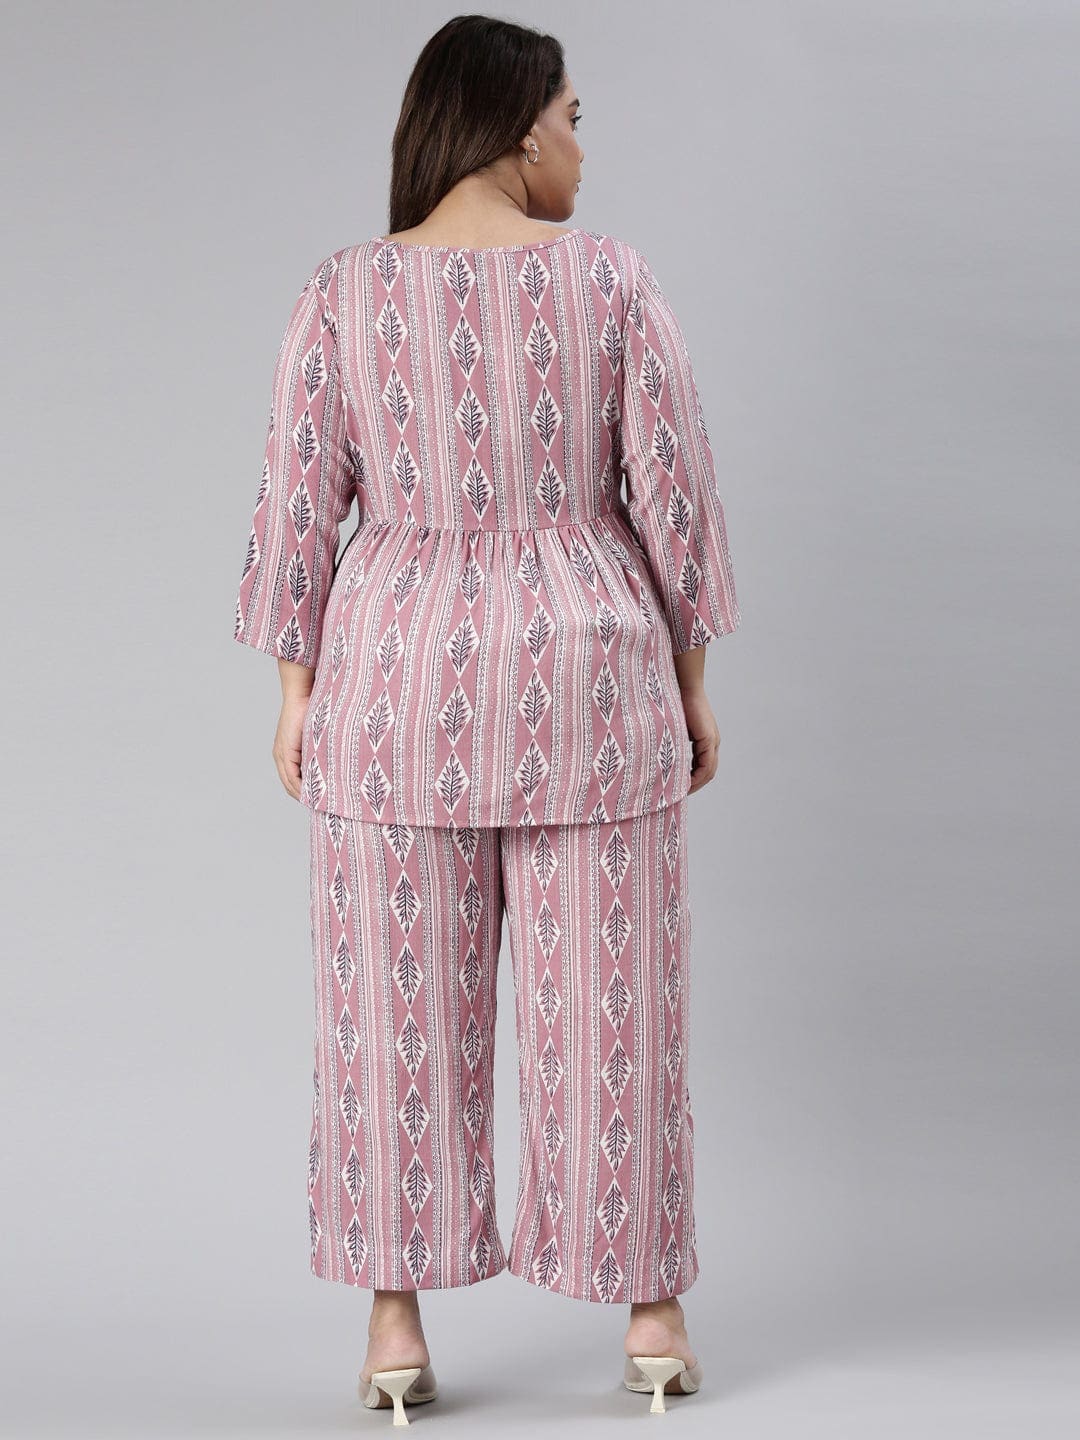 Women's Co-Ord set with Pink ethnic printed peplum top and elasticated palazzo